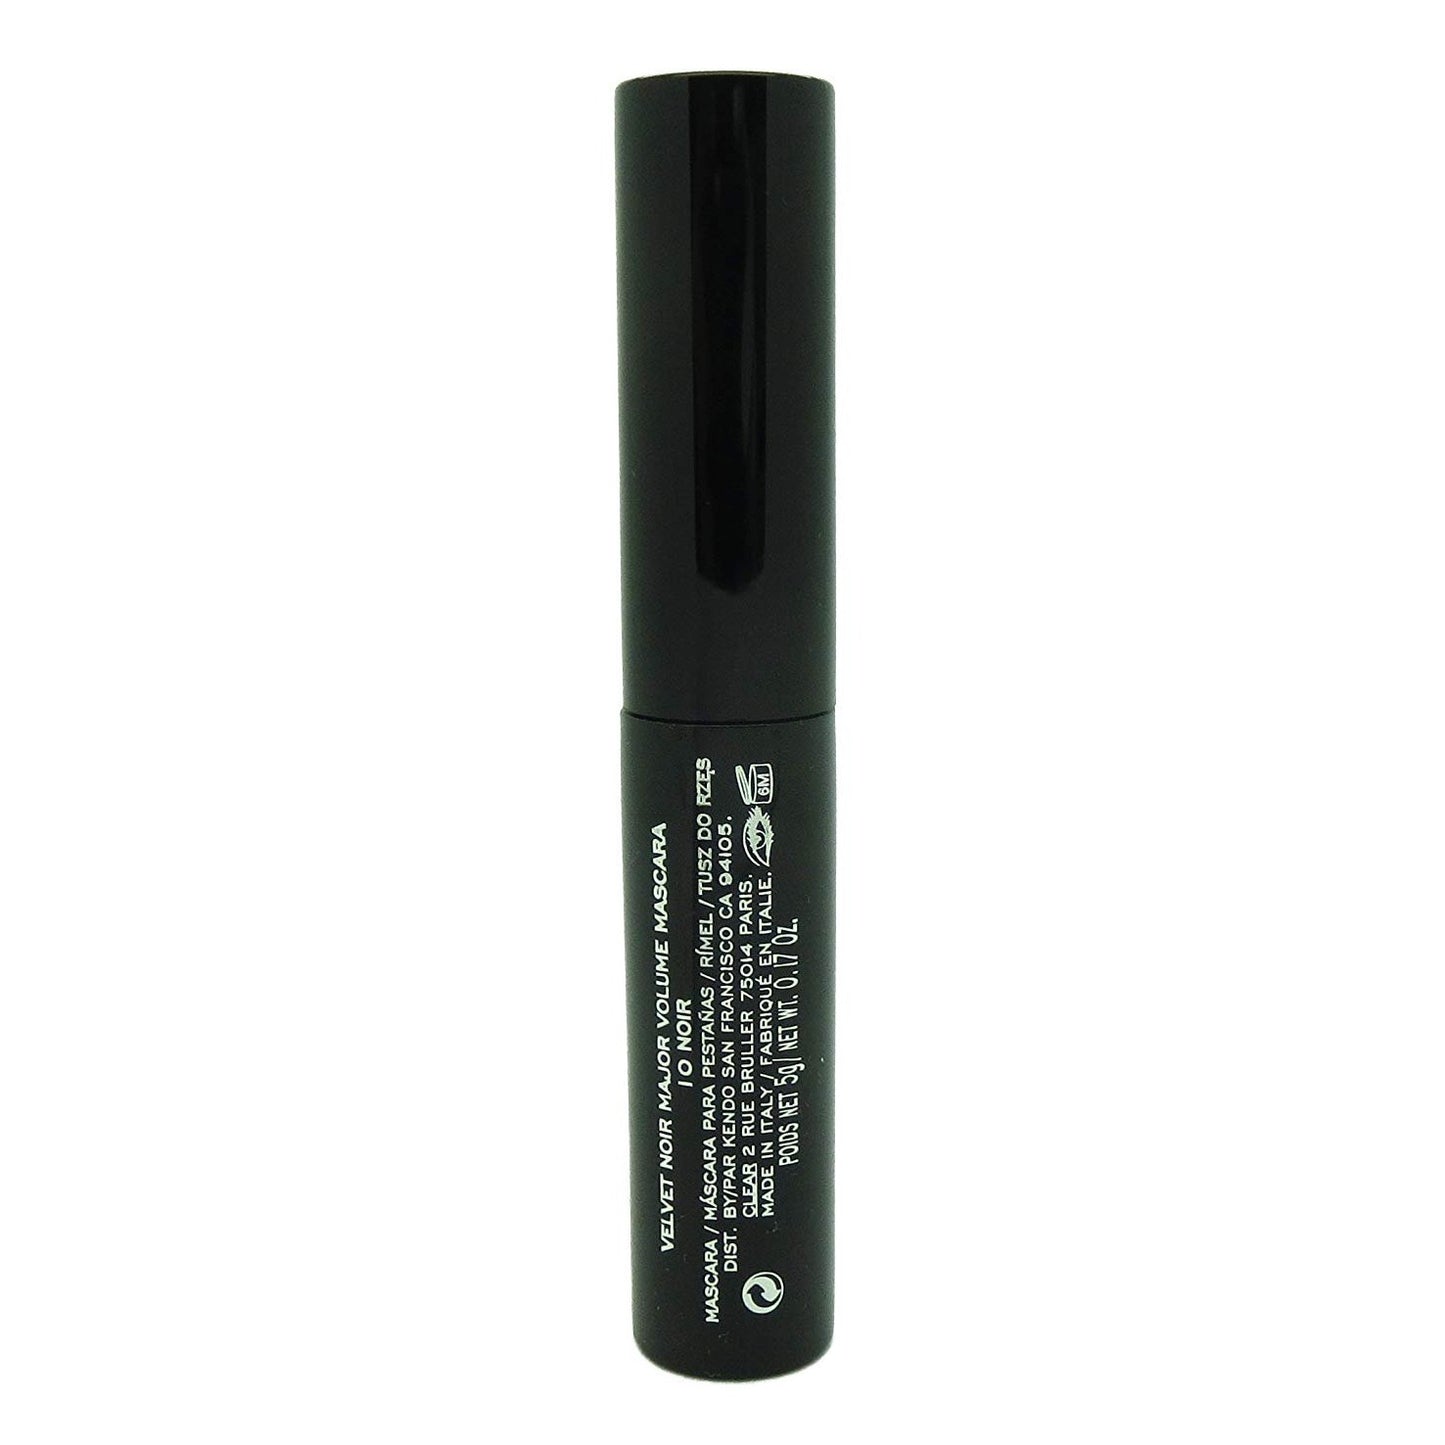 It's A smudge-proof volumizing mascara that makes lashes look thick and plush, yet never clumpy What It Does:  Adds Extreme Volume, Length & A Wipsy Dramatic Definition To Lashes, Giving Off A Super Long All Natural & Sexy Lash Appearance